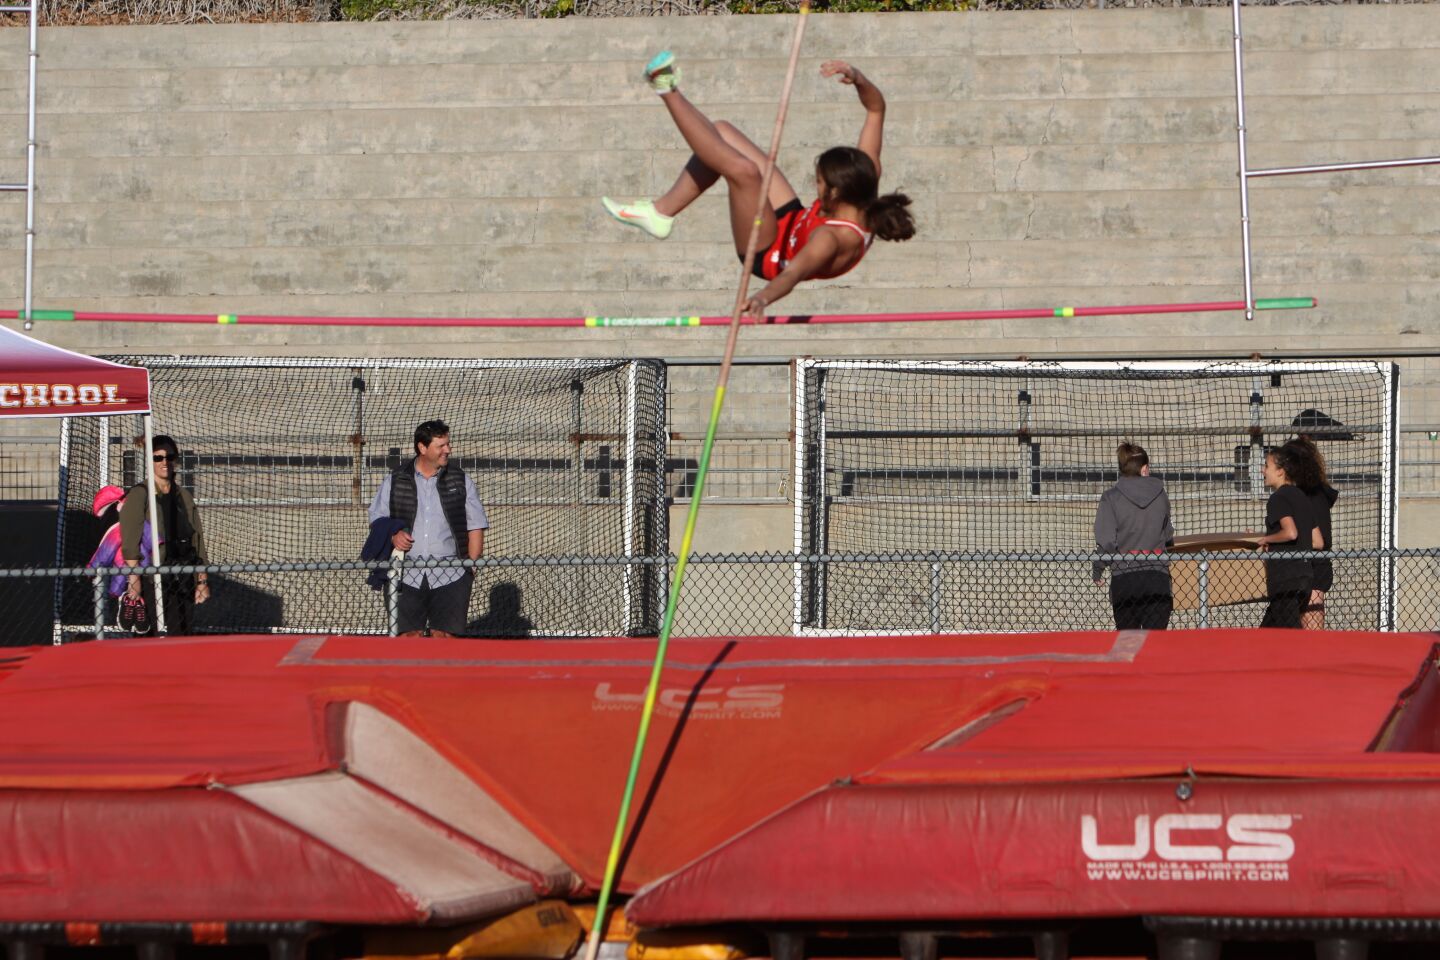 A La Jolla High School athlete clears the bar in the pole vault.